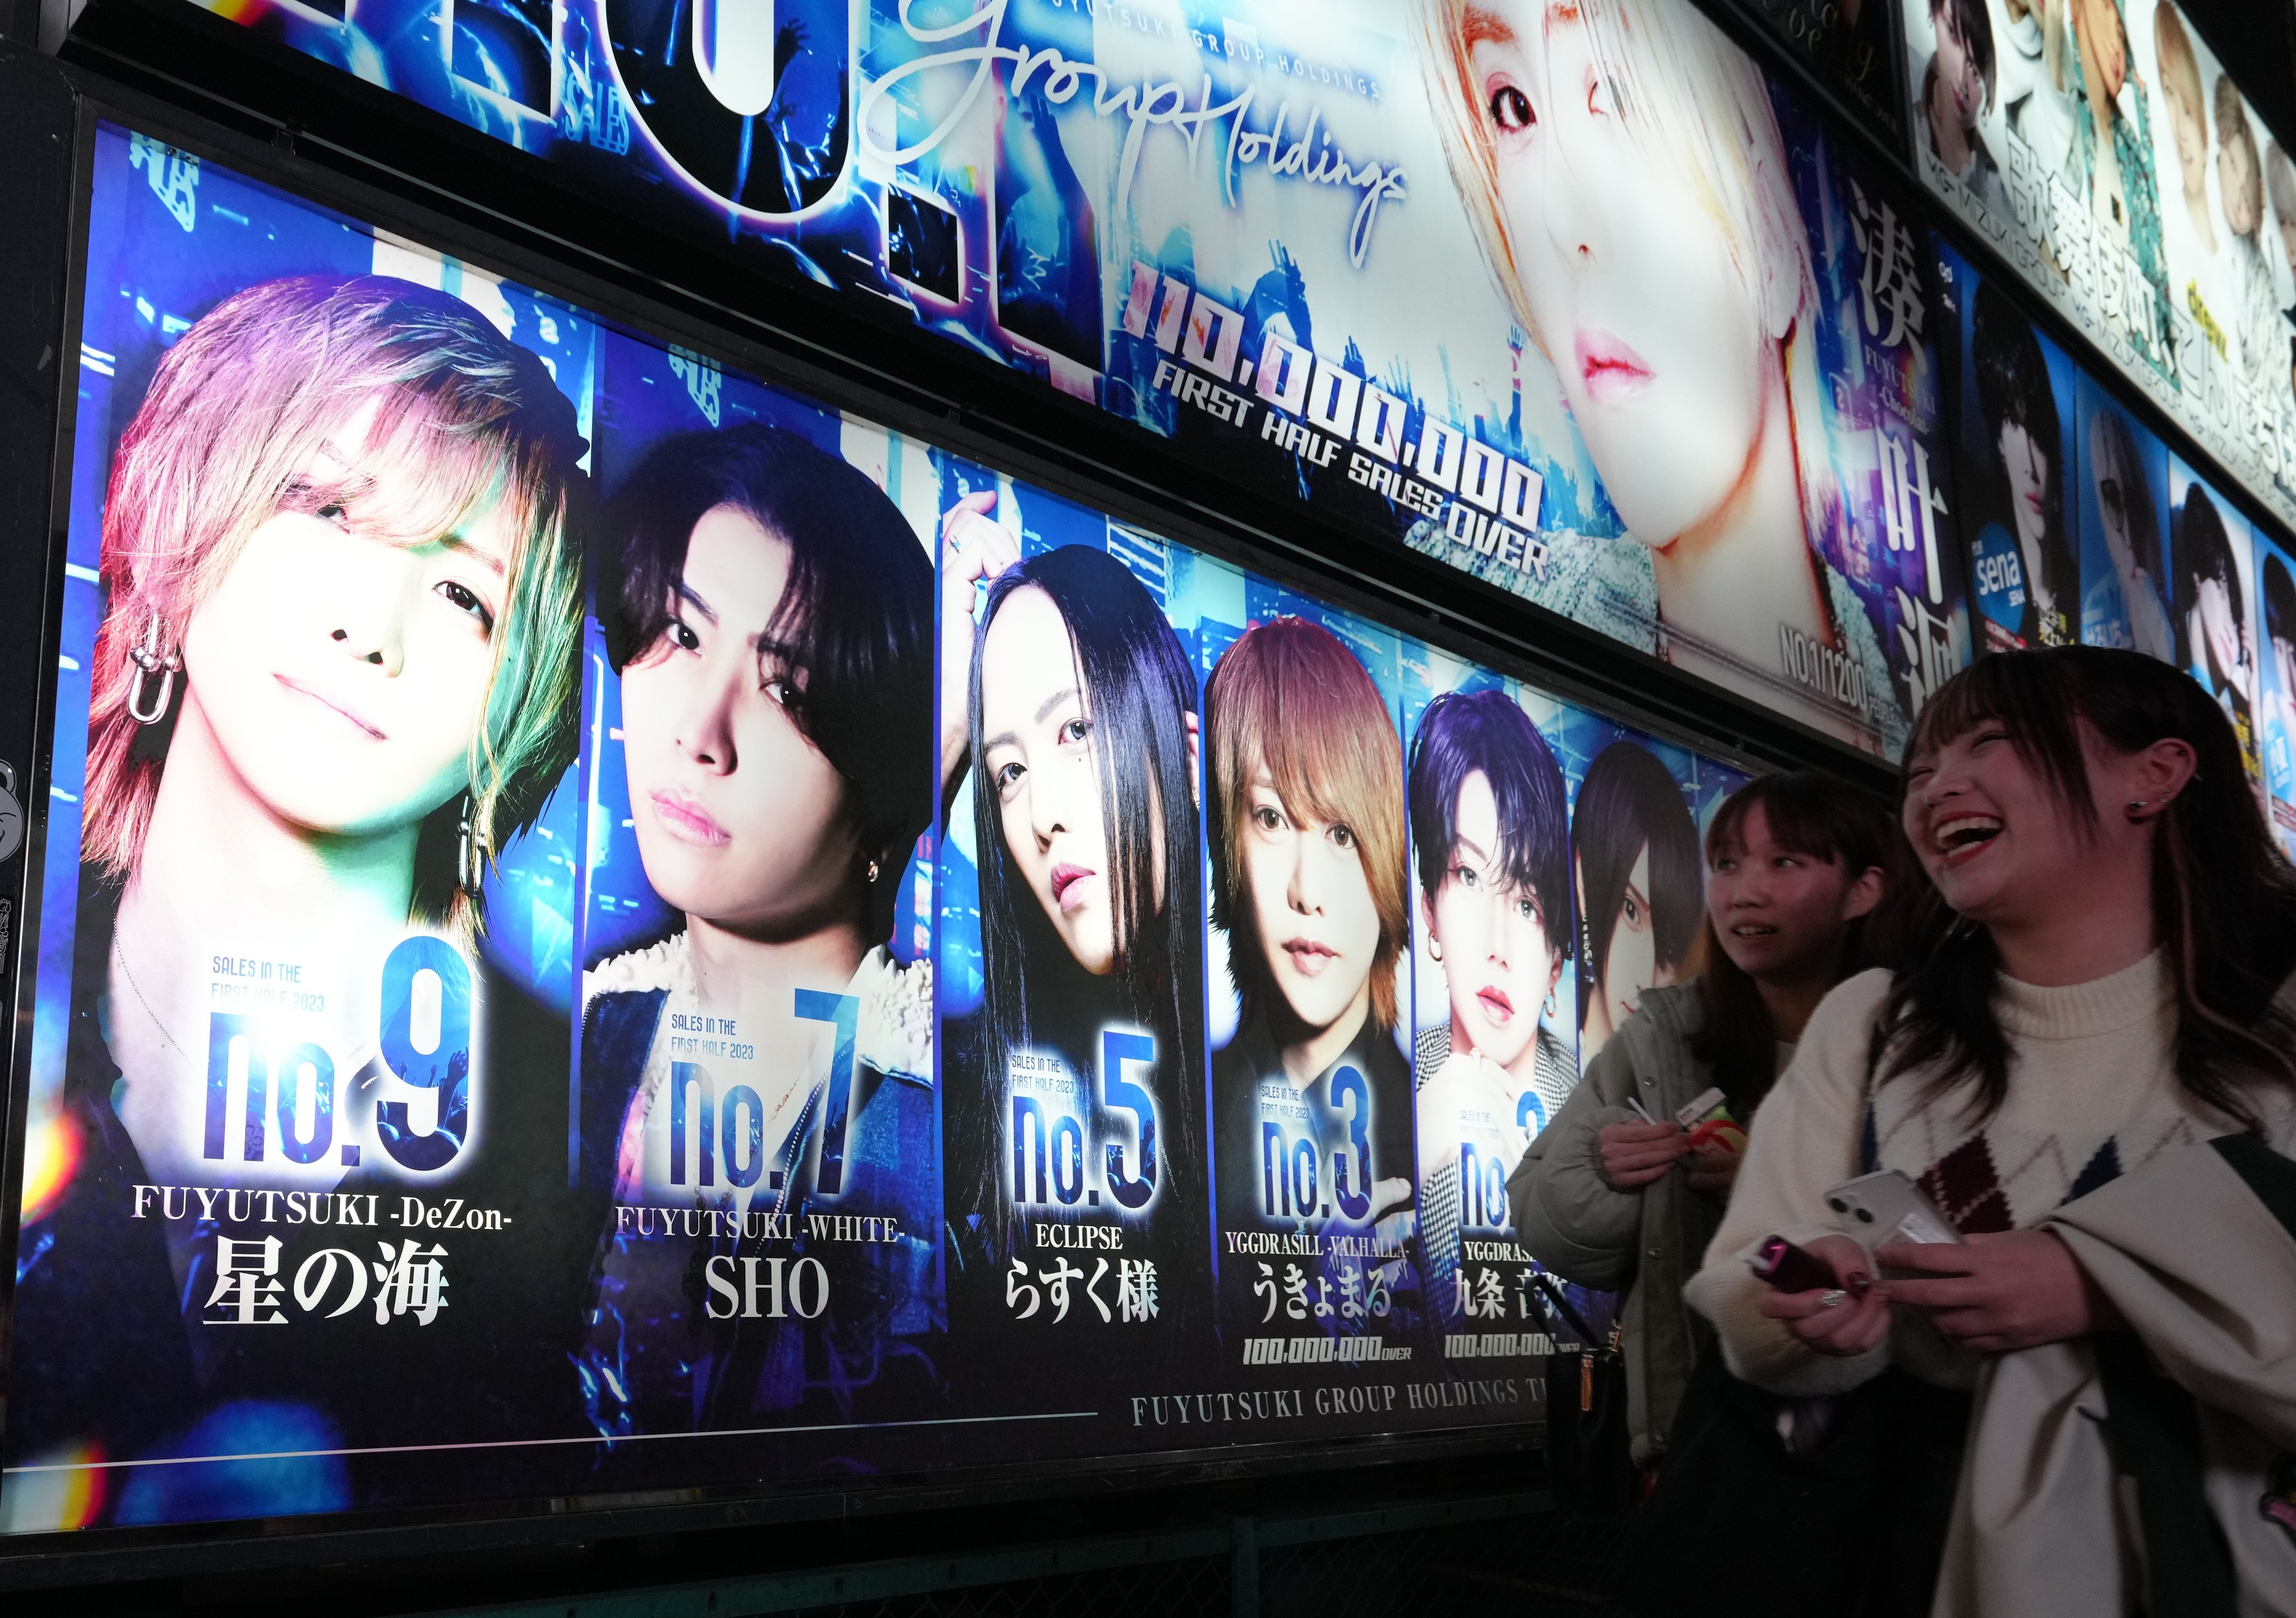 Women walk past an advertisement for a “host club” in the Shinjuku ward of Tokyo in December. Photo: EPA-EFE